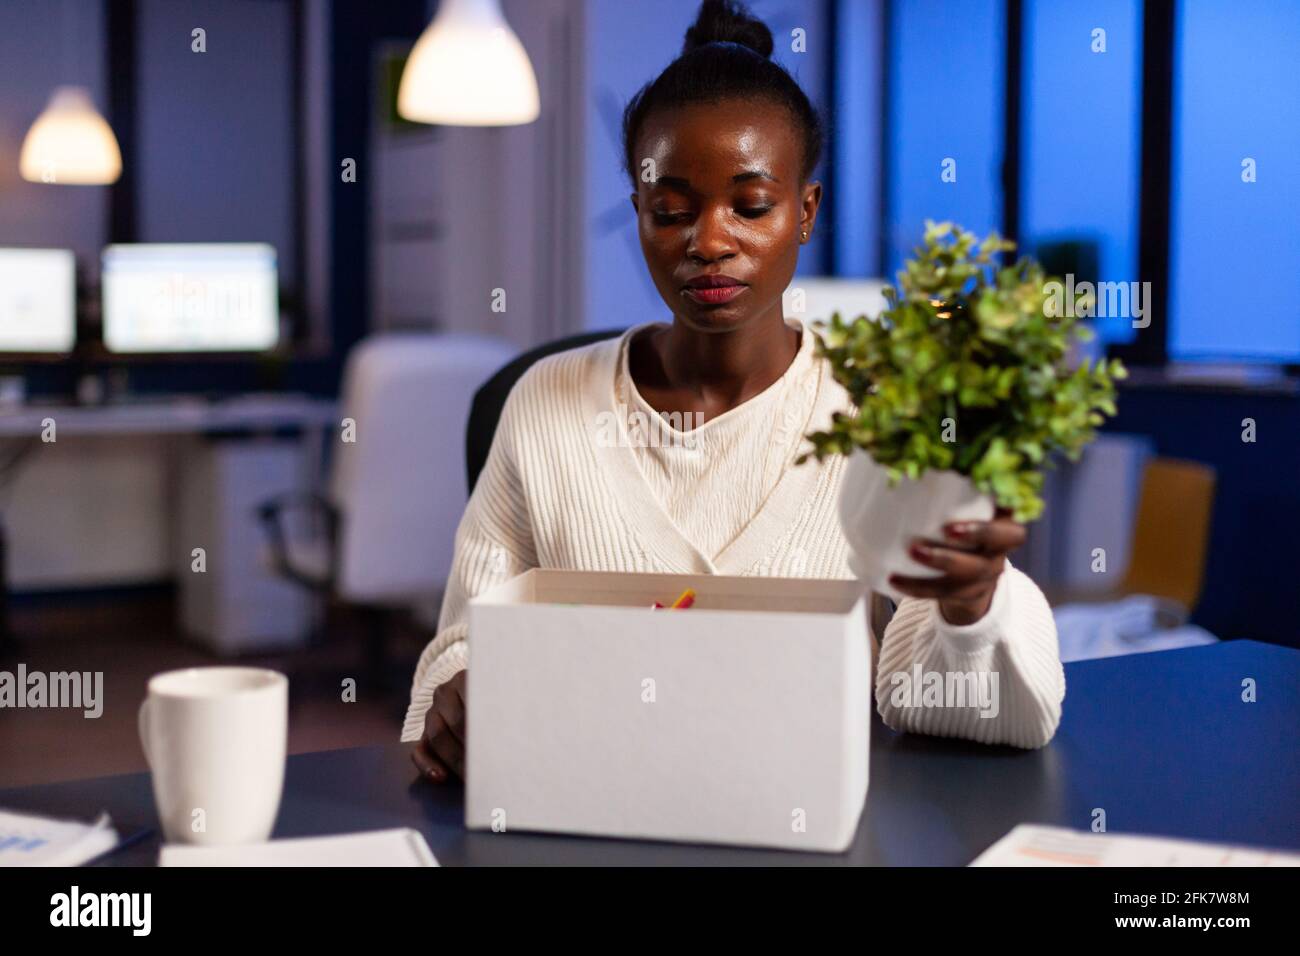 Depressed african woman after being dismissed from work late at night. Unemployed packing things late at night. woman leaving workplace office in midnight. Stock Photo